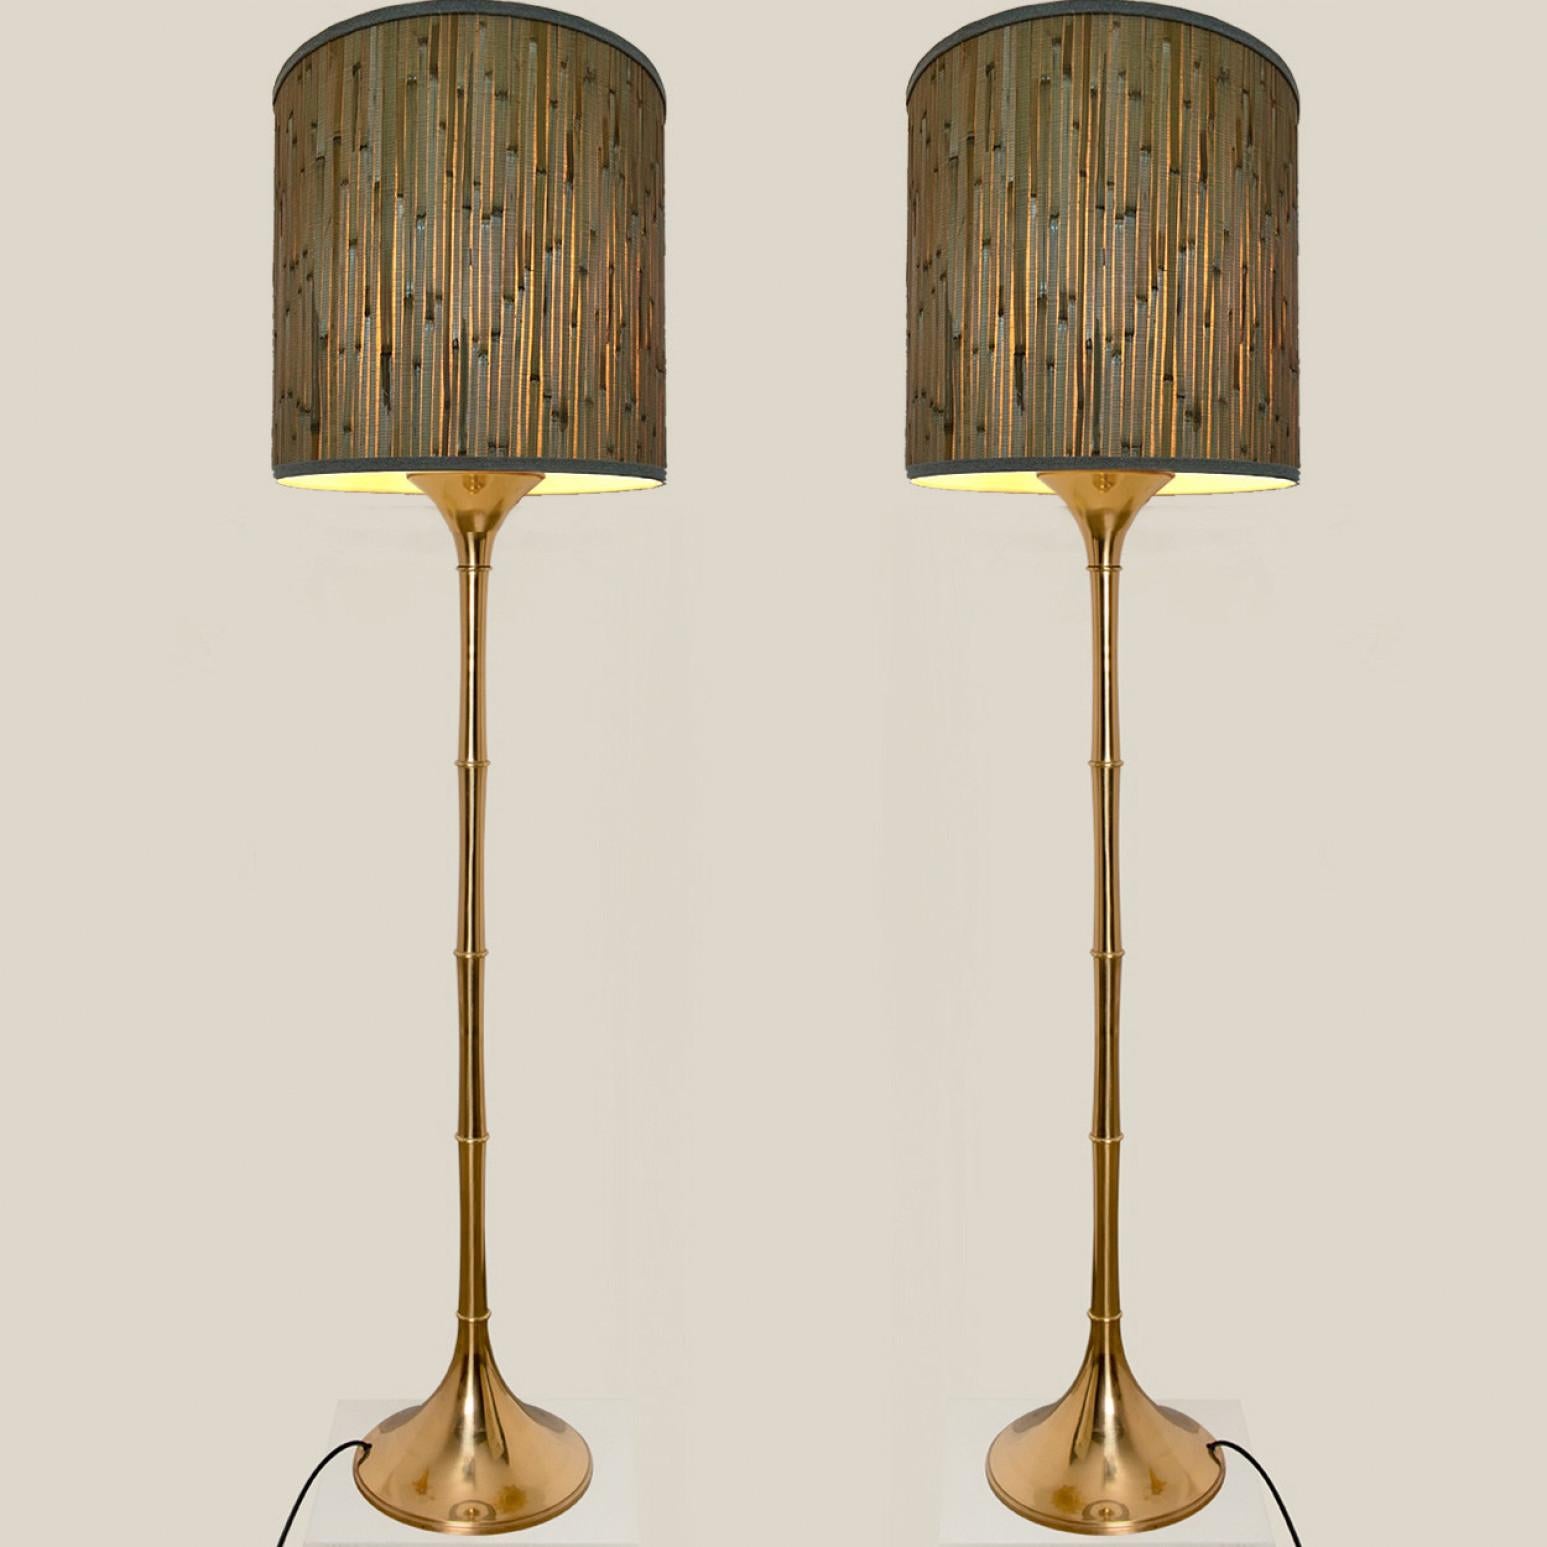 Pair of floor Lamps Gold Brass and Wood by Ingo Maurer, Europe, Germany, 1968 For Sale 5